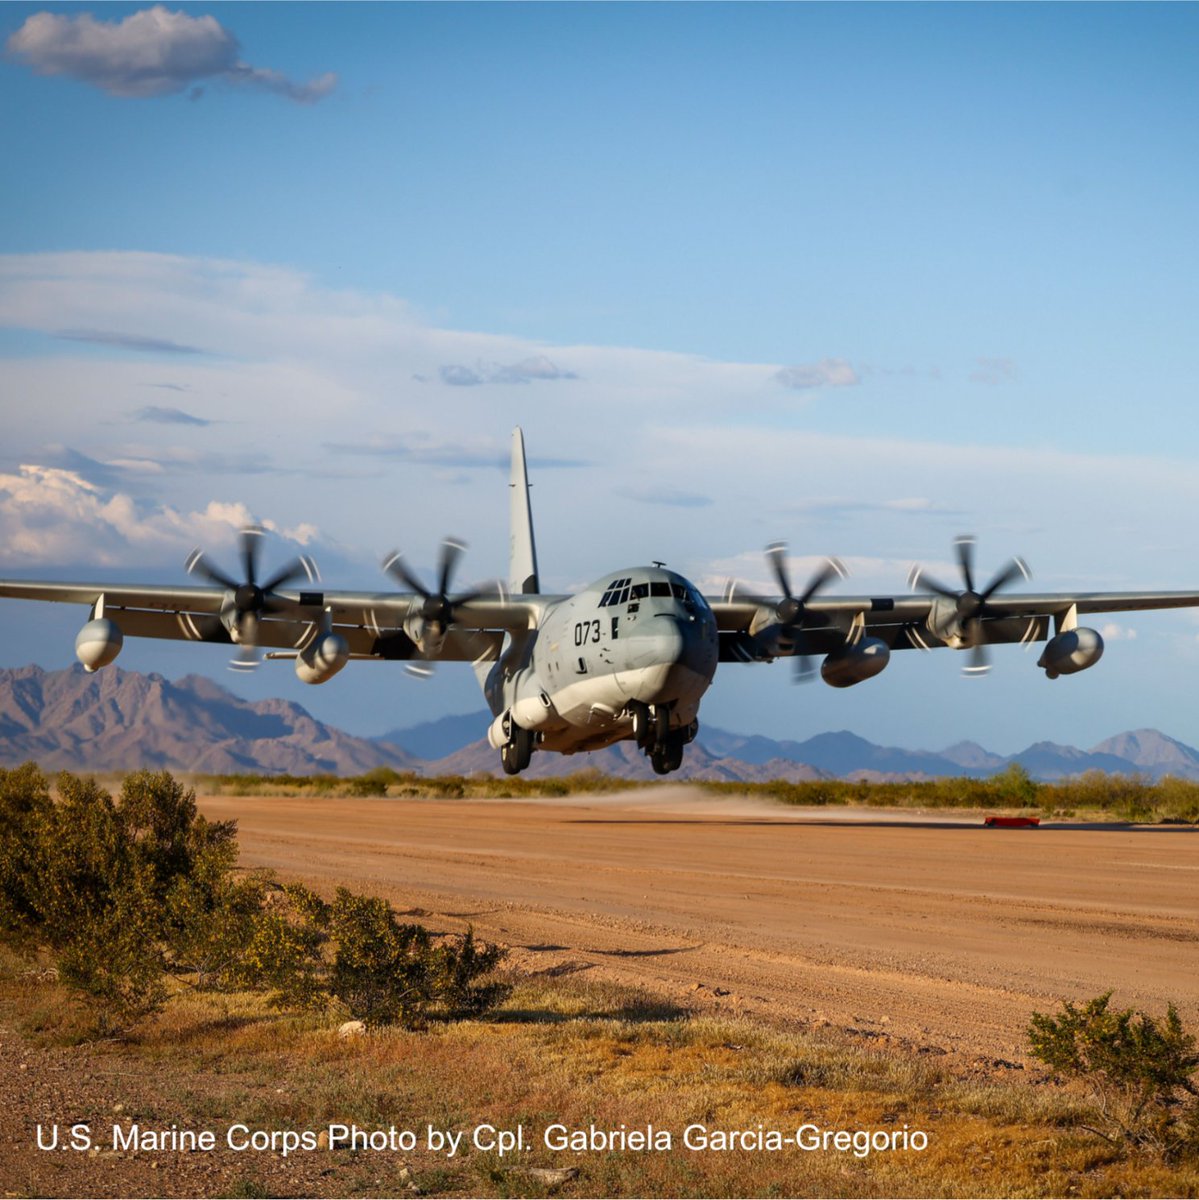 The KC-130J has the capability to land on unprepared runways, helping the @USMC reach places where other airlifters can’t, won’t, or don’t go. #WorkhorseWednesday